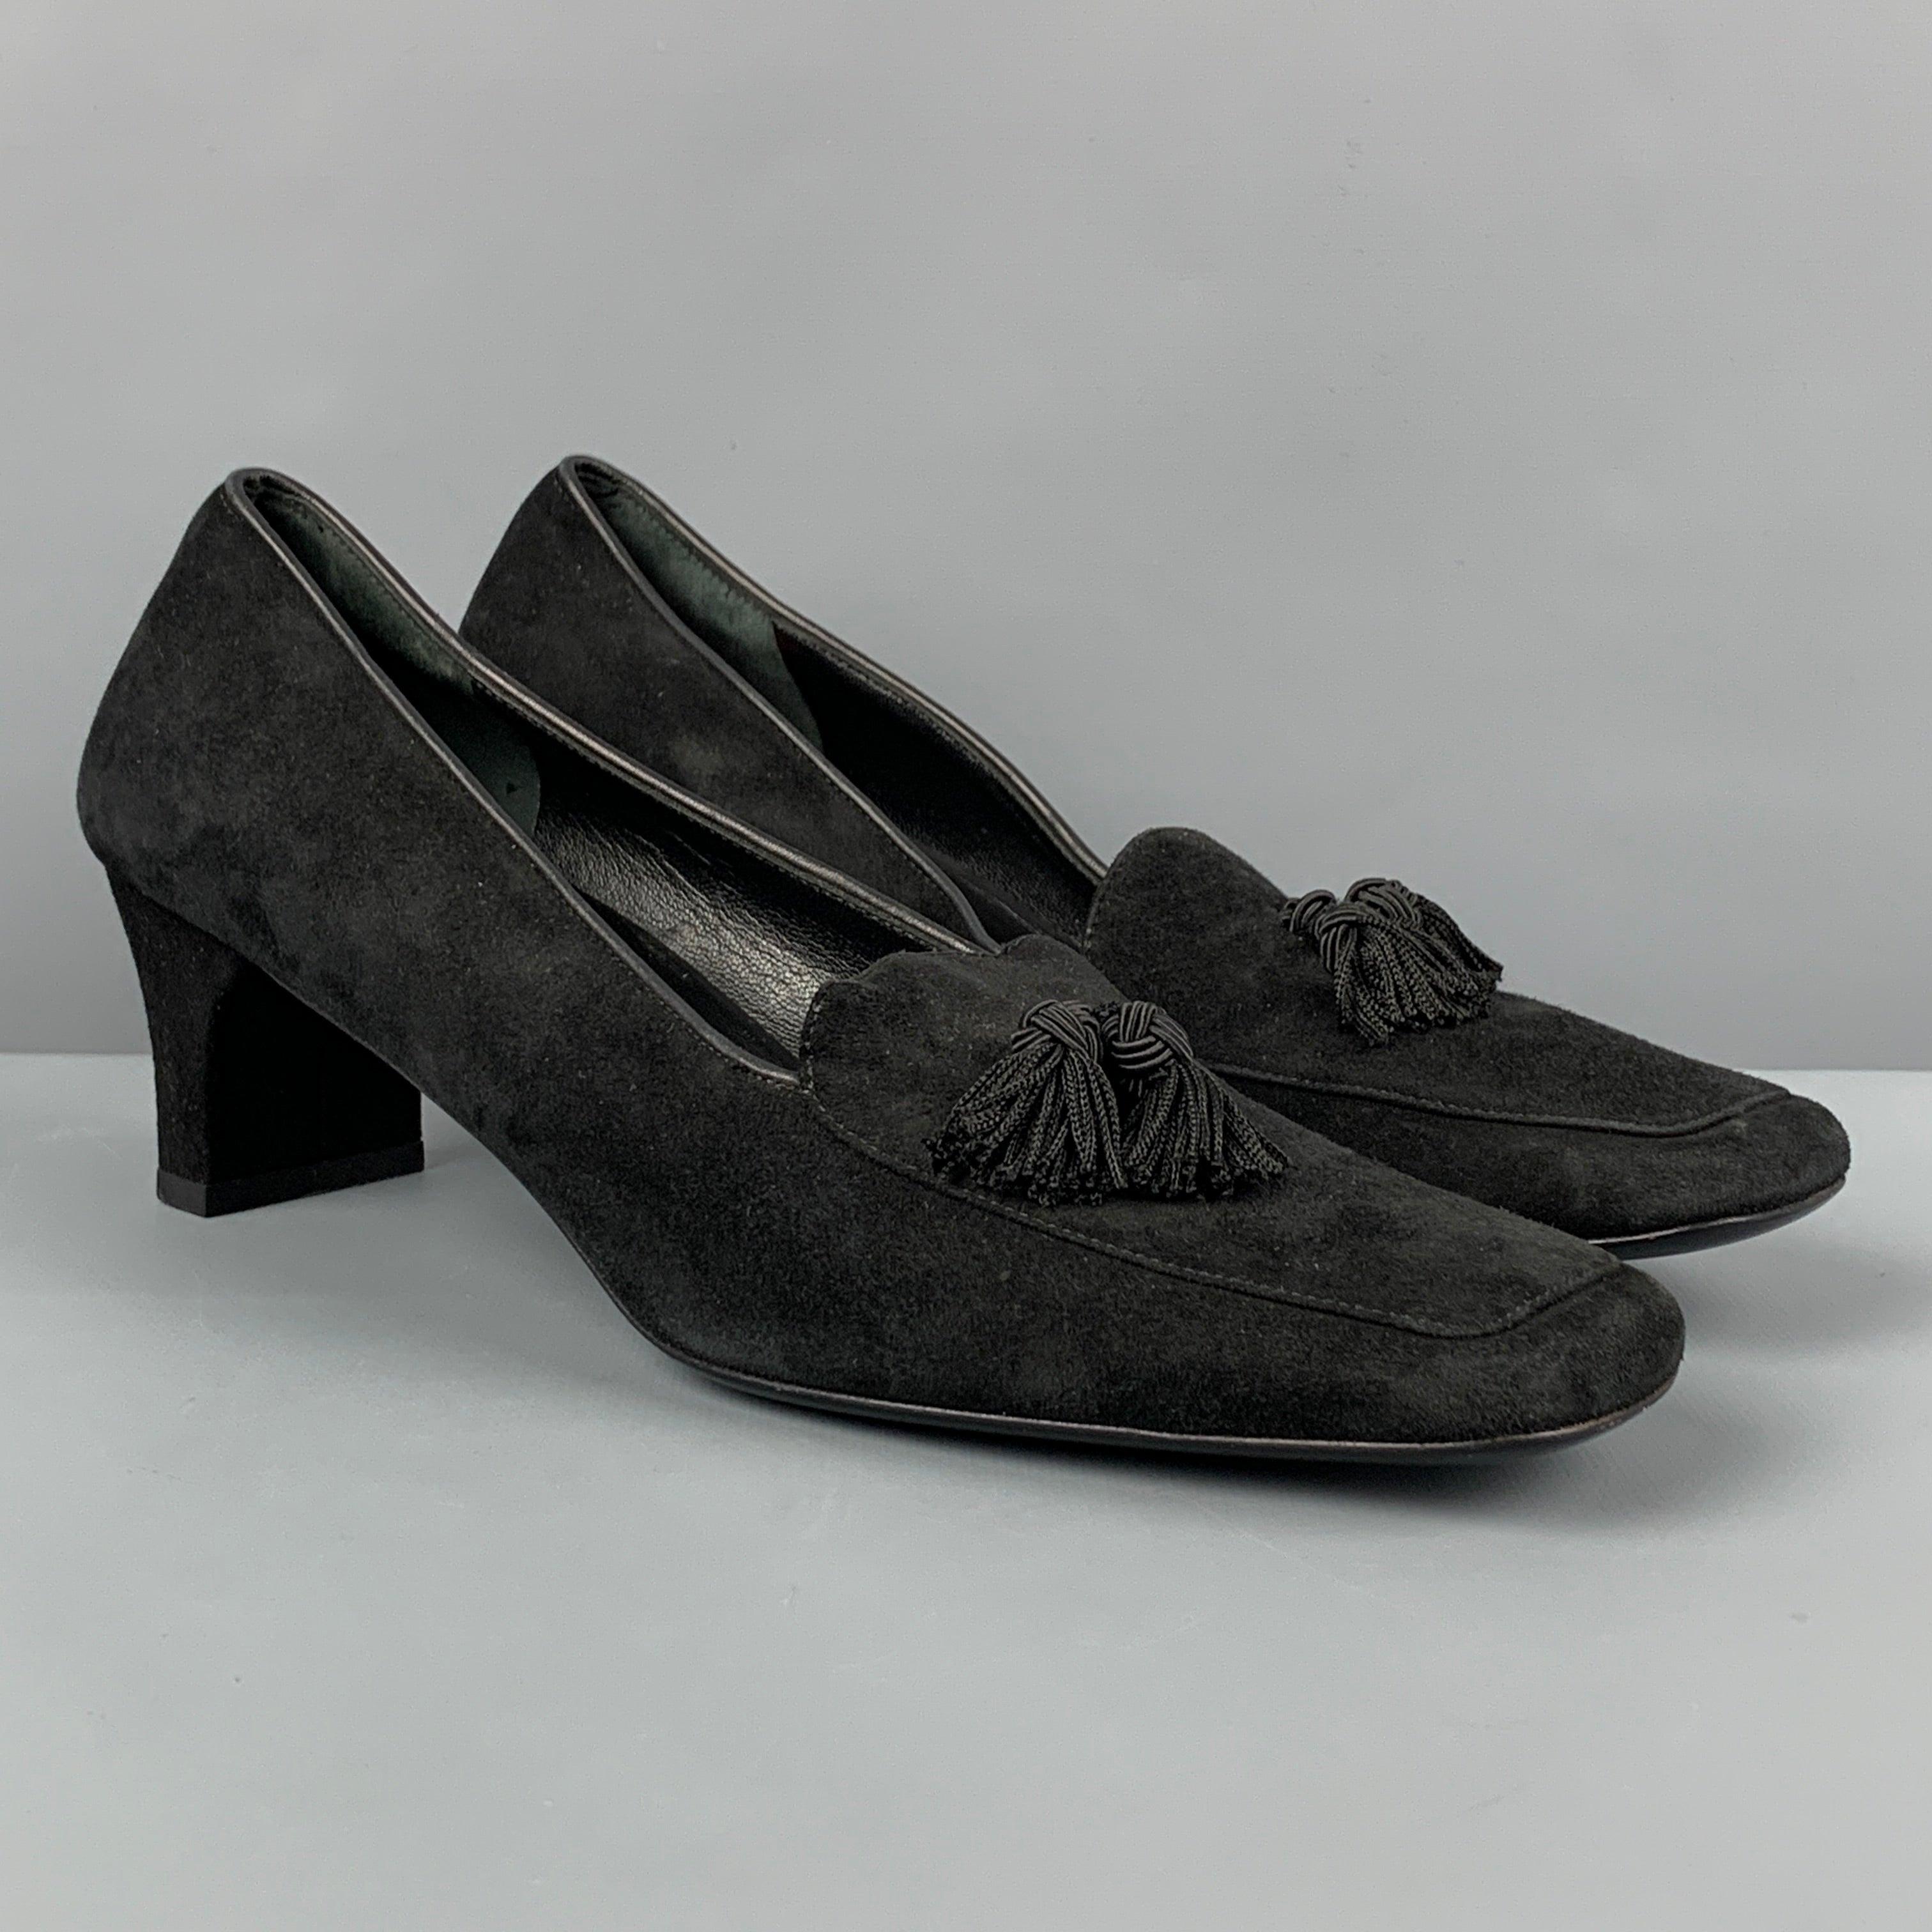 SALVATORE FERRAGAMO pumps comes in a black suede featuring a square toe, tassel details, an a kitten heel. Made in Italy.
 Very Good
 Pre-Owned Condition. 
 

 Marked:  9 
 

 Measurements: 
  Heel: 2.25 inches 
  
  
  
 Sui Generis Reference: